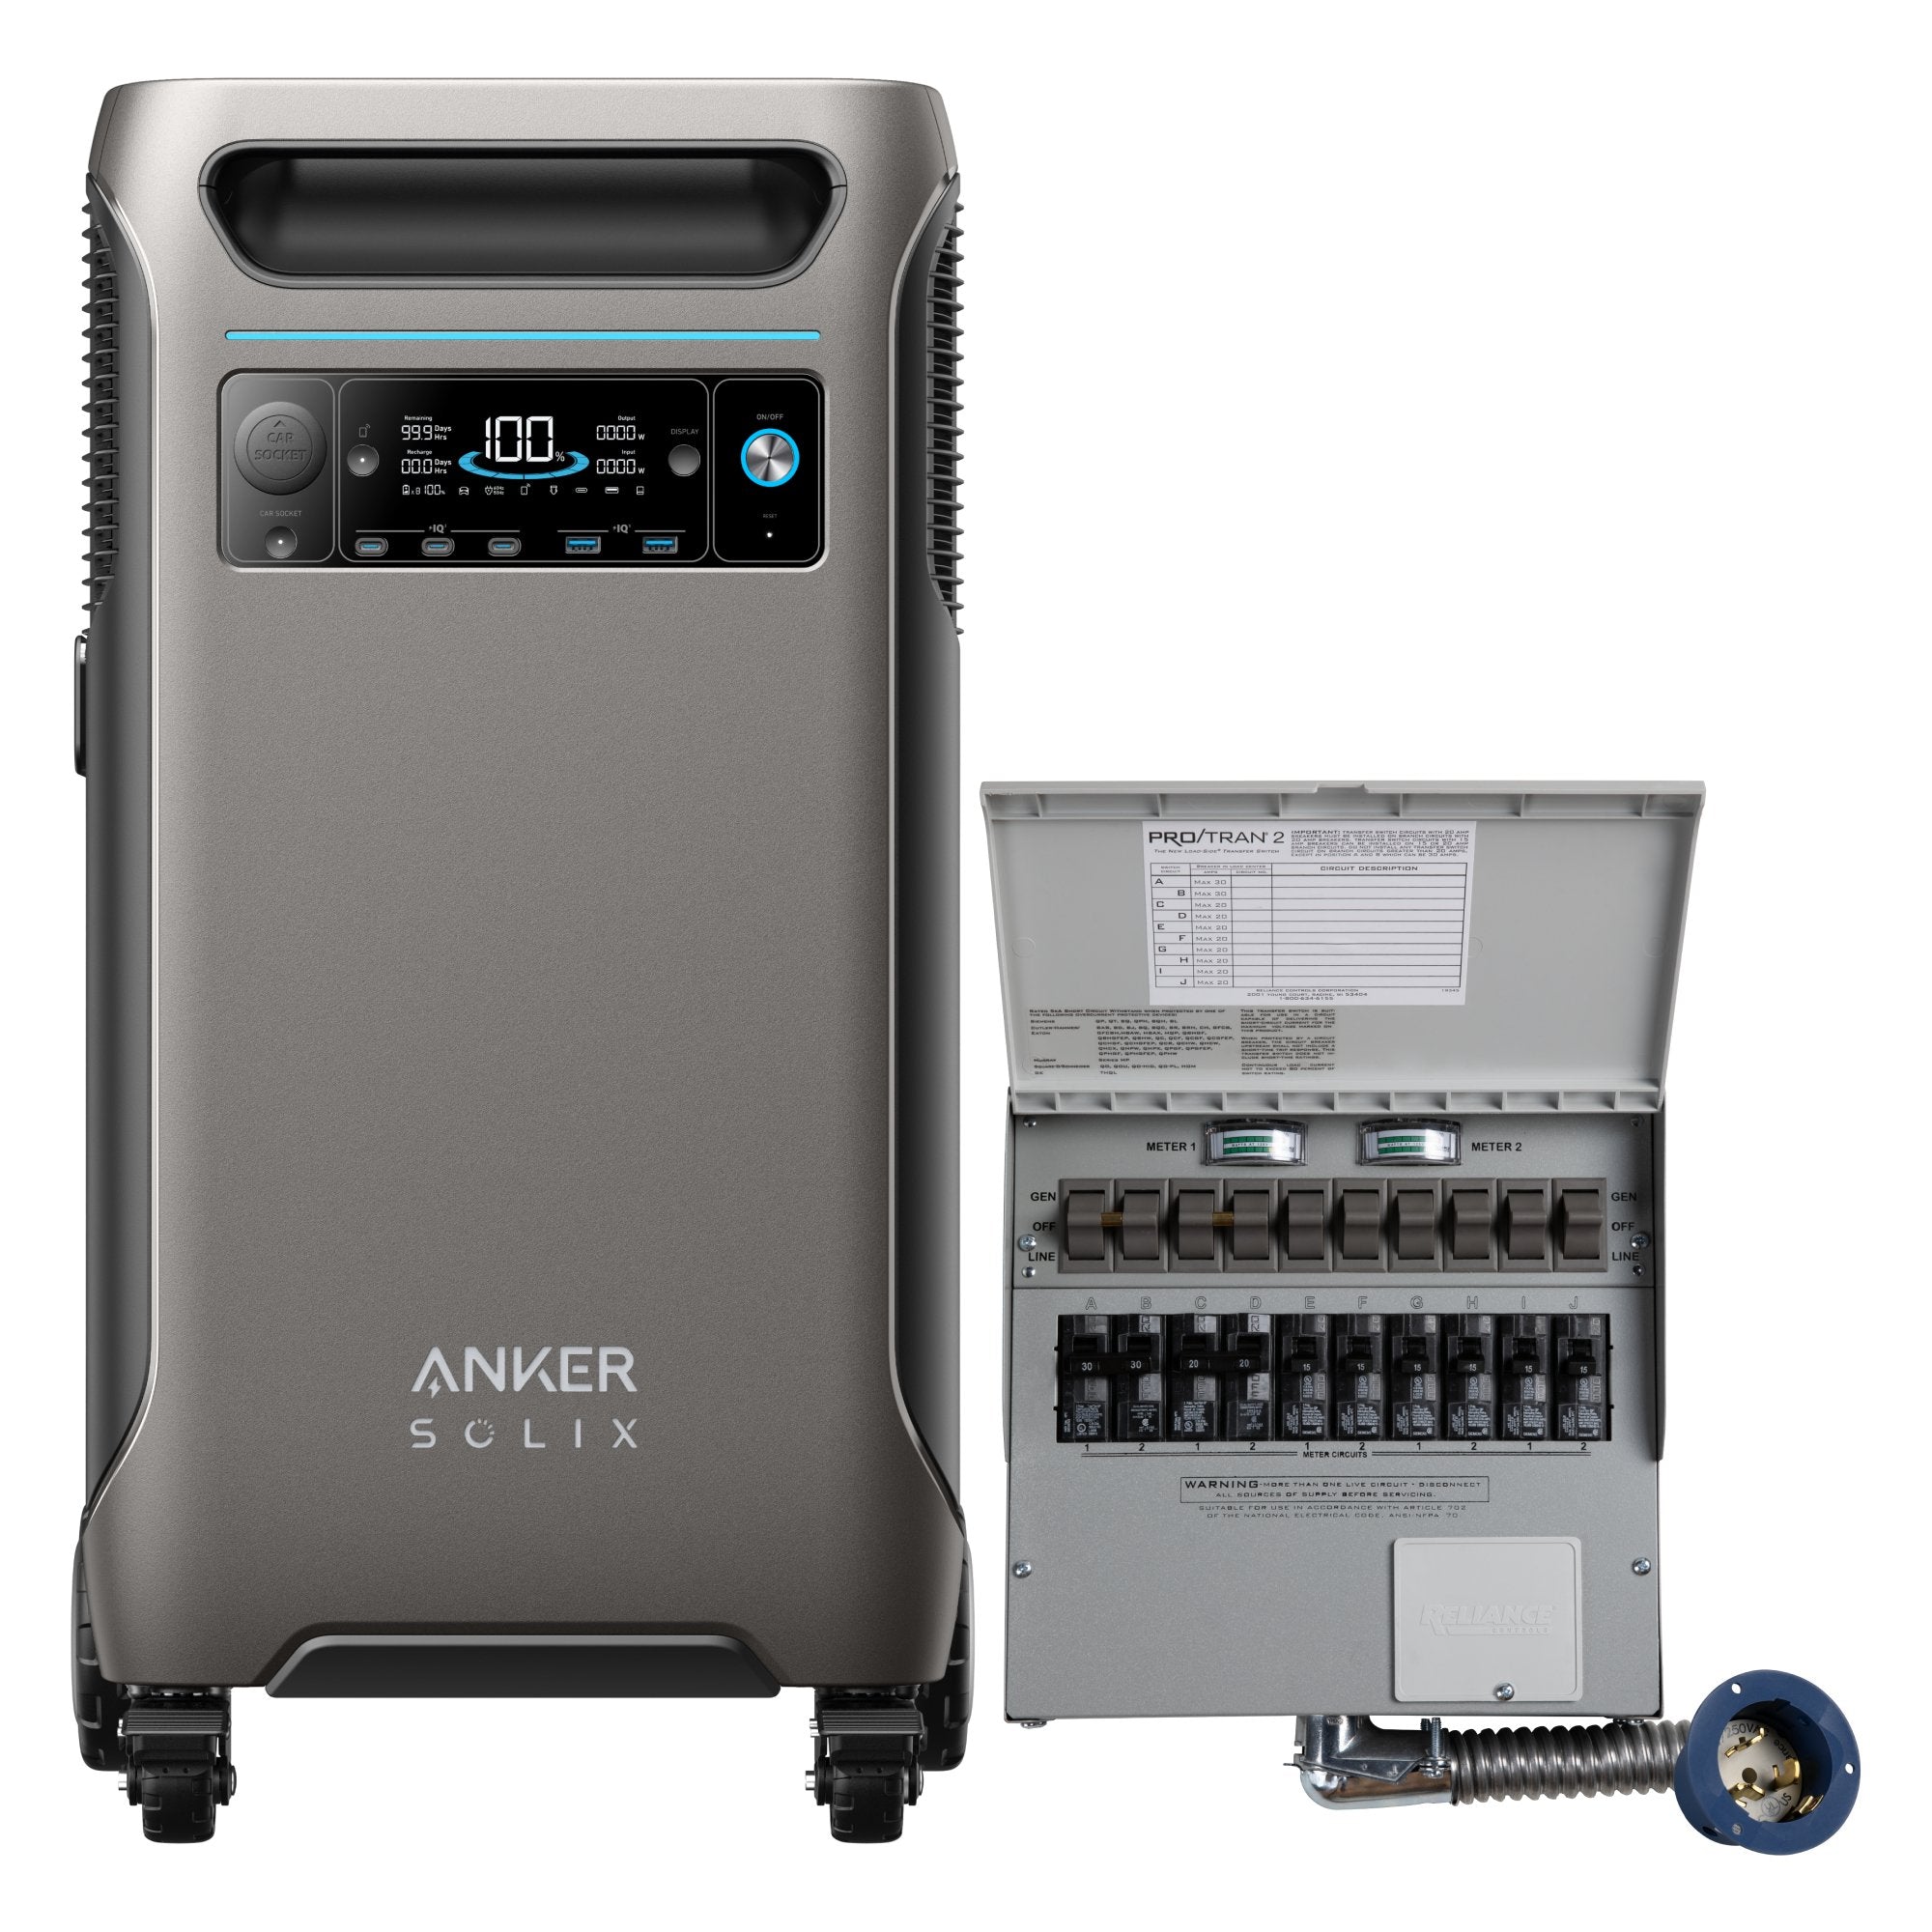 Anker SOLIX F3800 + Transfer Switch + 3x 400W Solar Panel - Solar Generators and Power Stations Plus